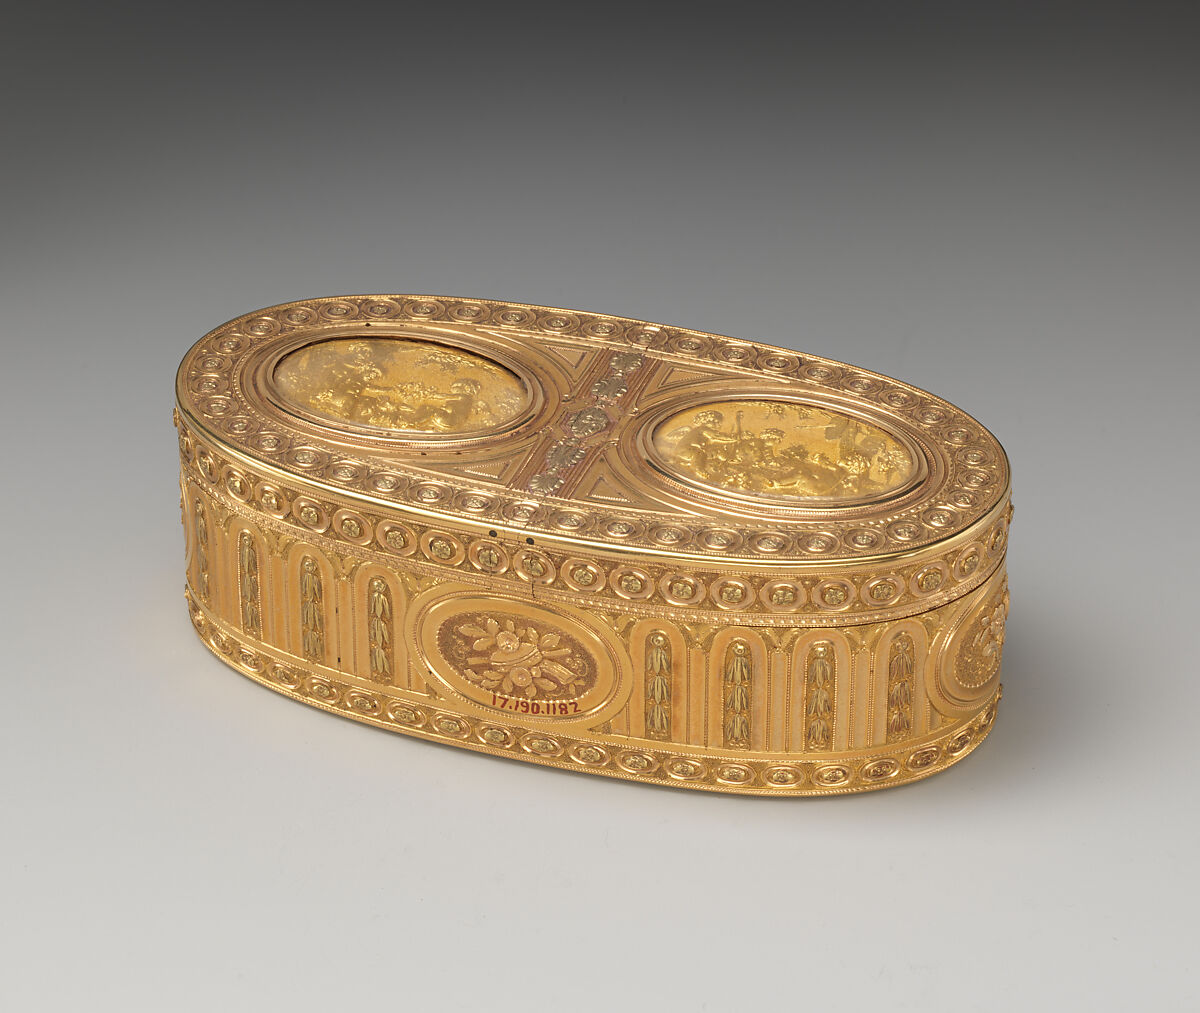 Double snuffbox, Melchior-René Barré (master 1768, recorded 1791), Gold, glass, French, Paris 